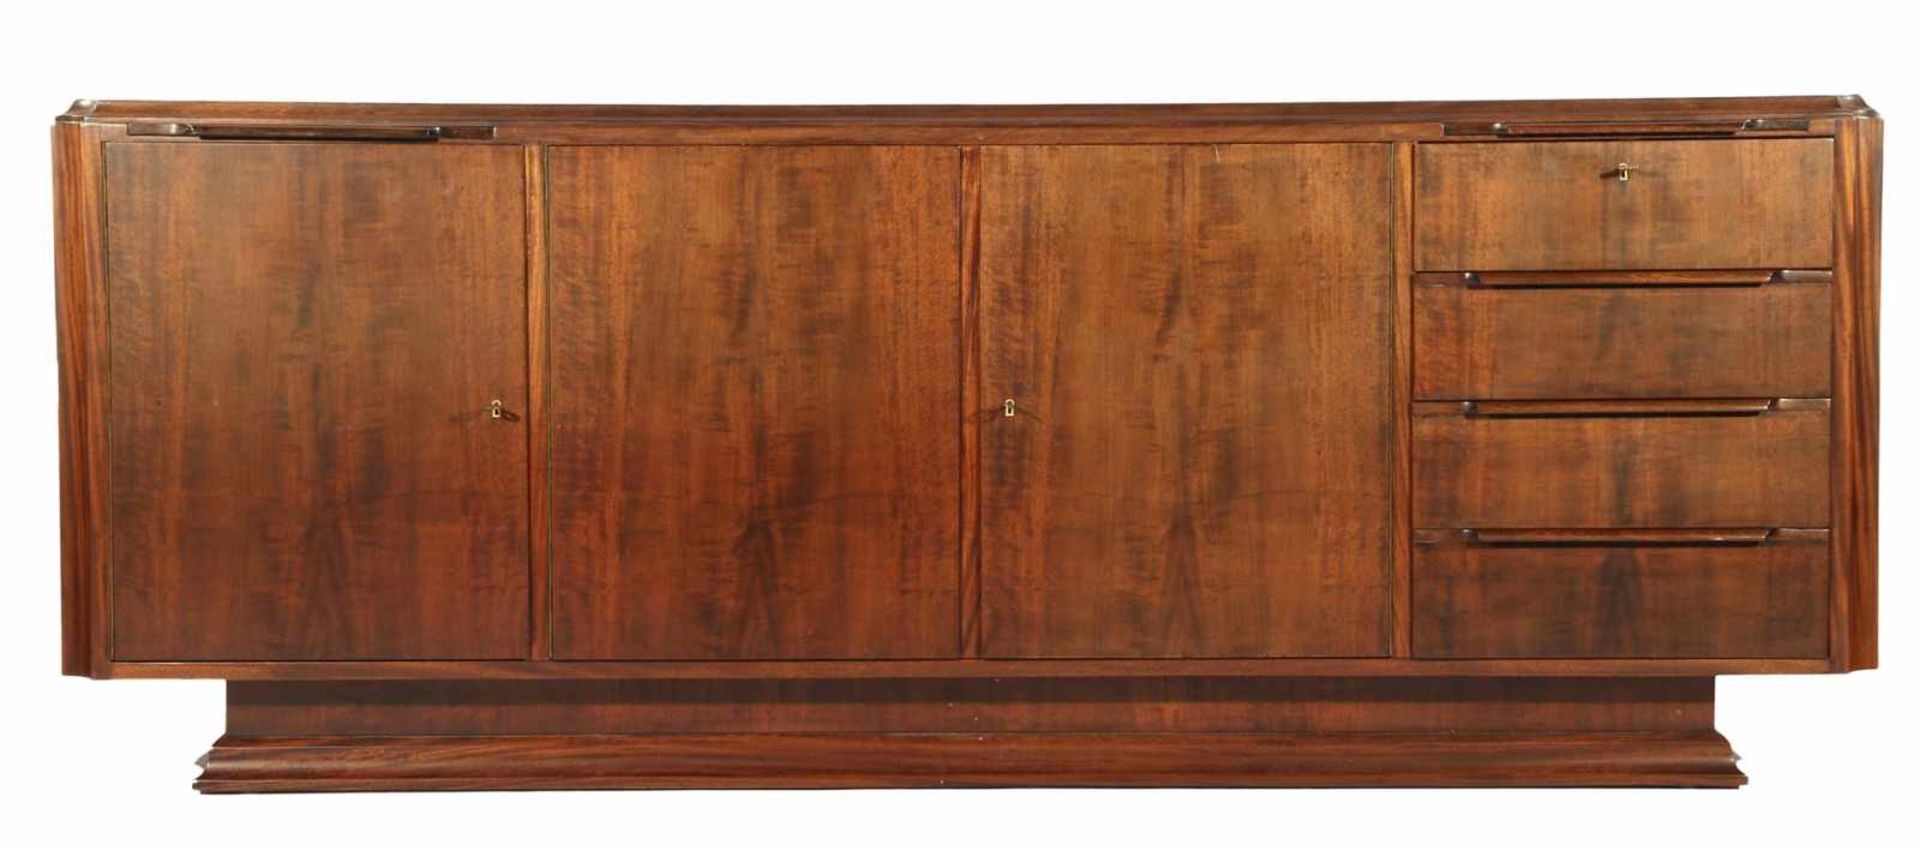 Mahogany veneer sideboard with 3 doors, 4 drawers and 2 pull-out shelves 88 cm high, 231 cm wide,